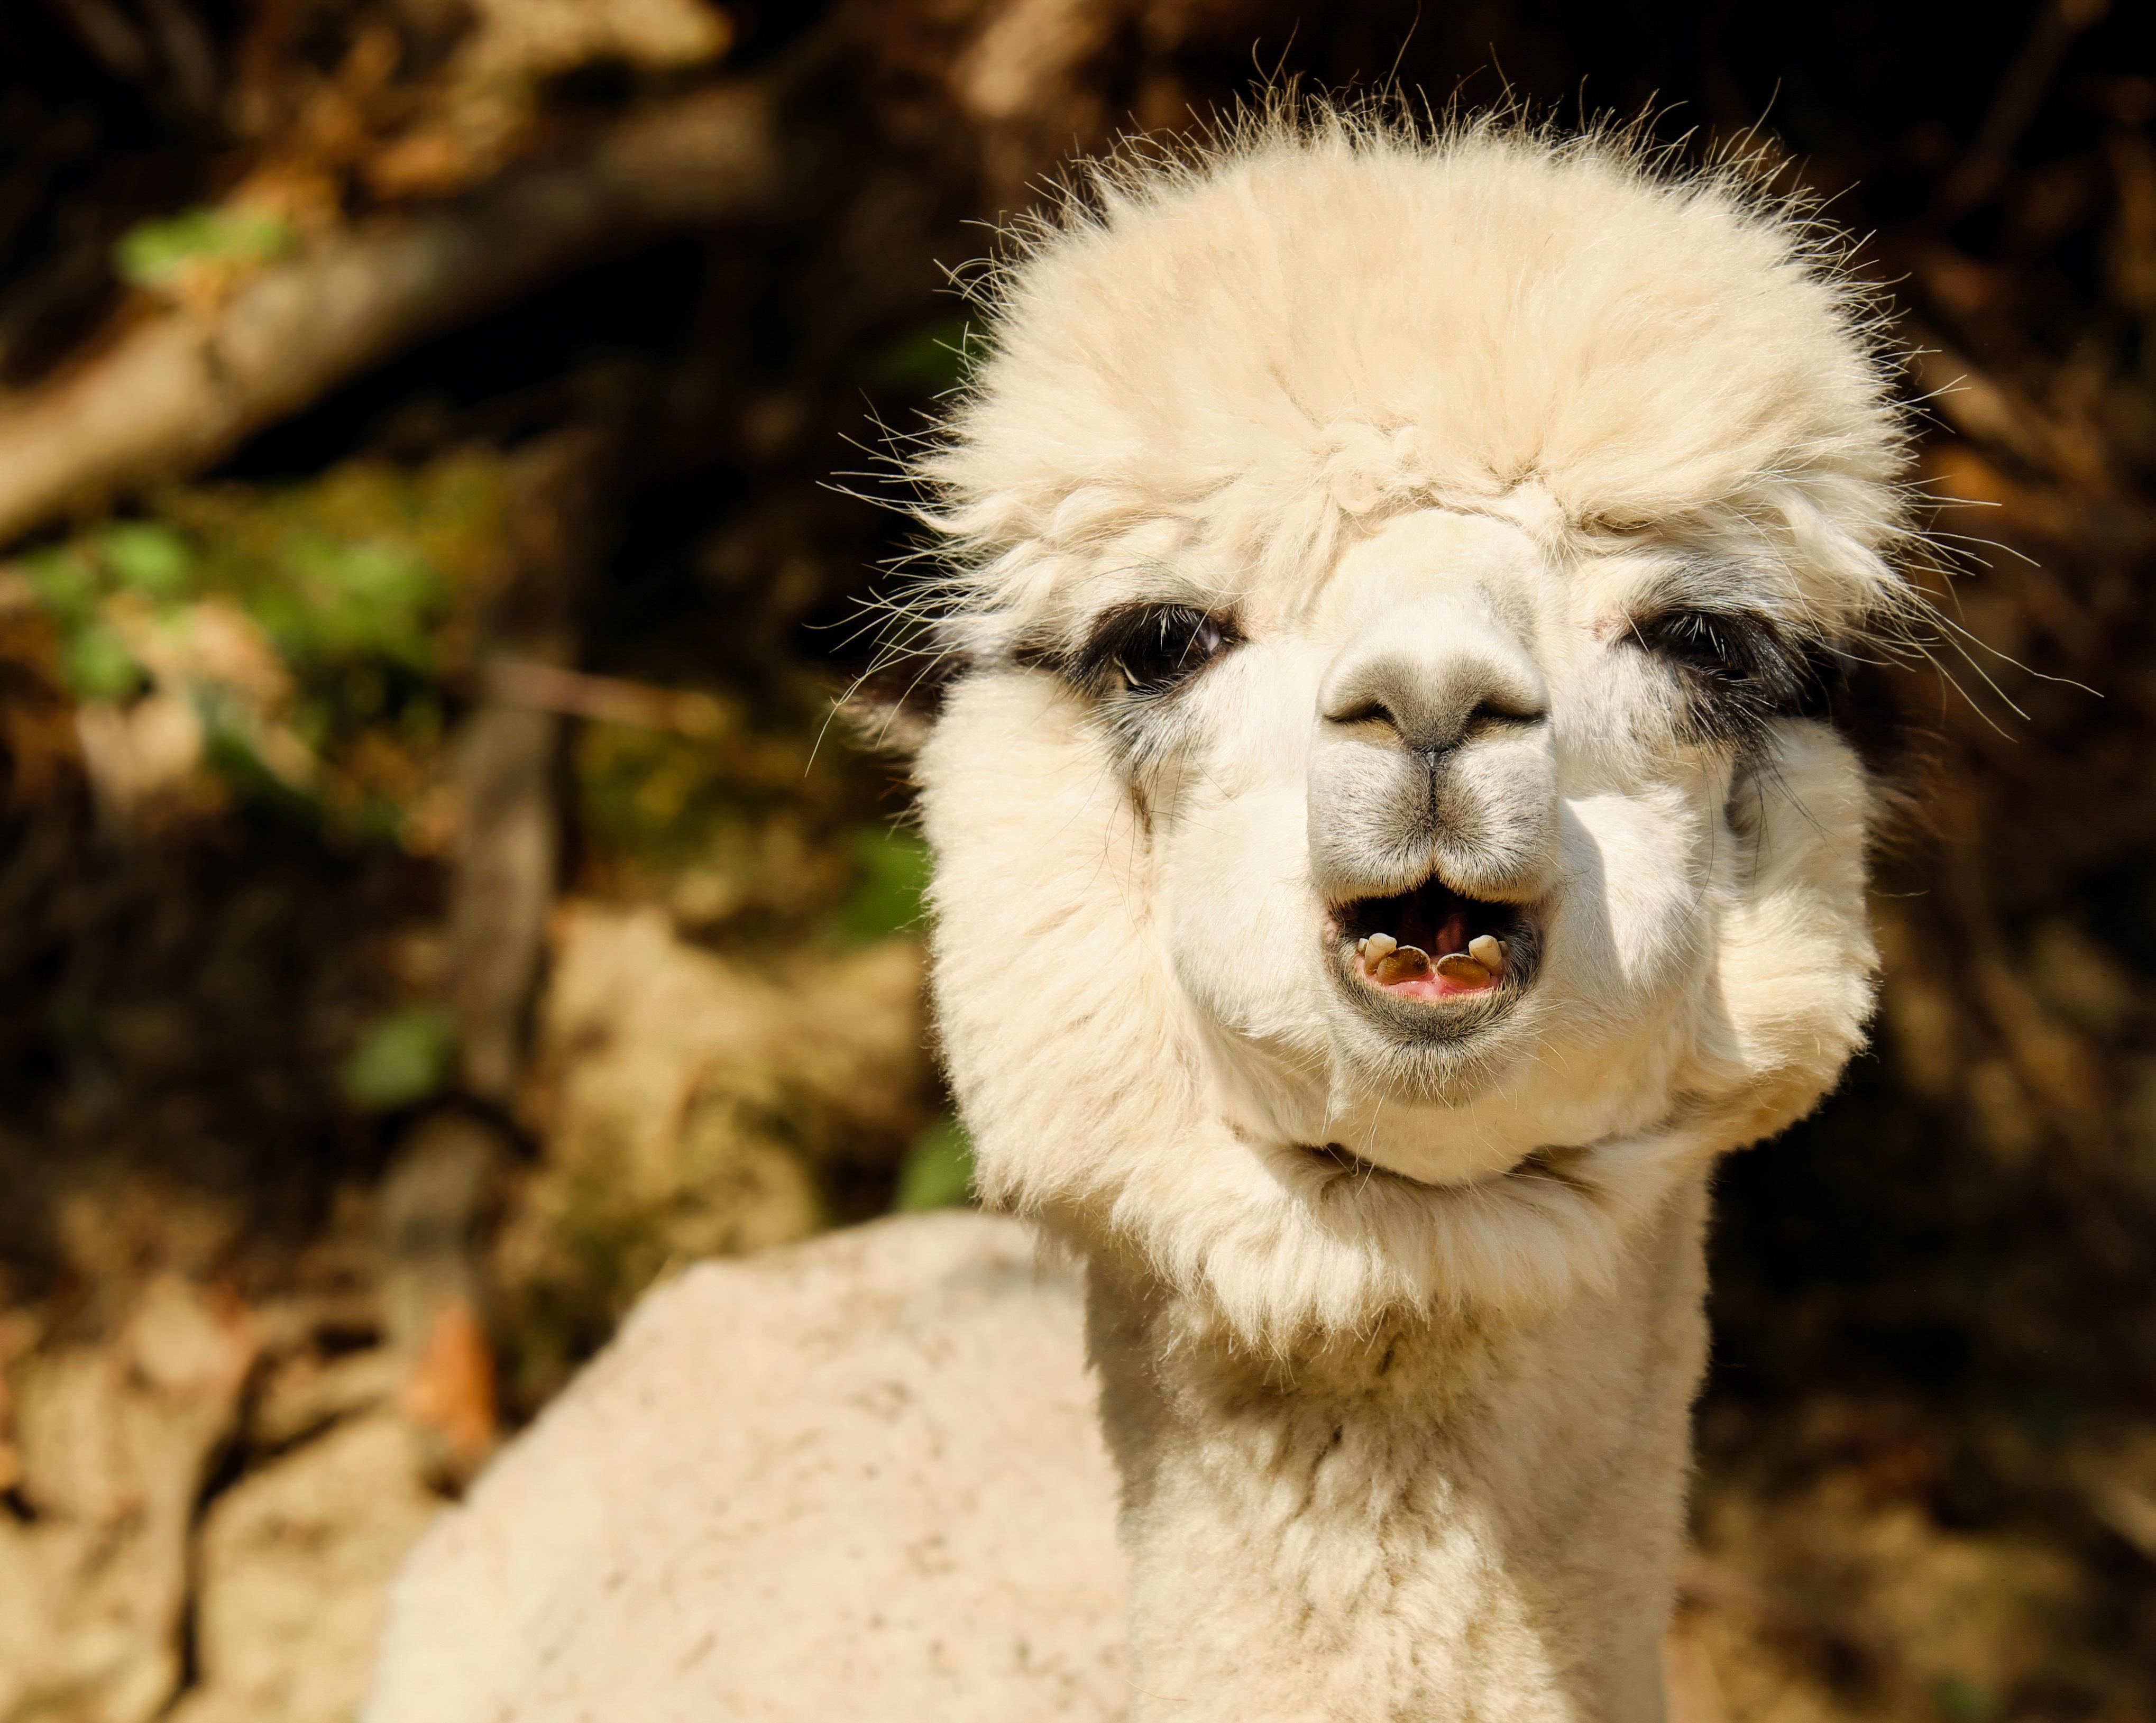 White young Alpaca wallpaper and image, picture